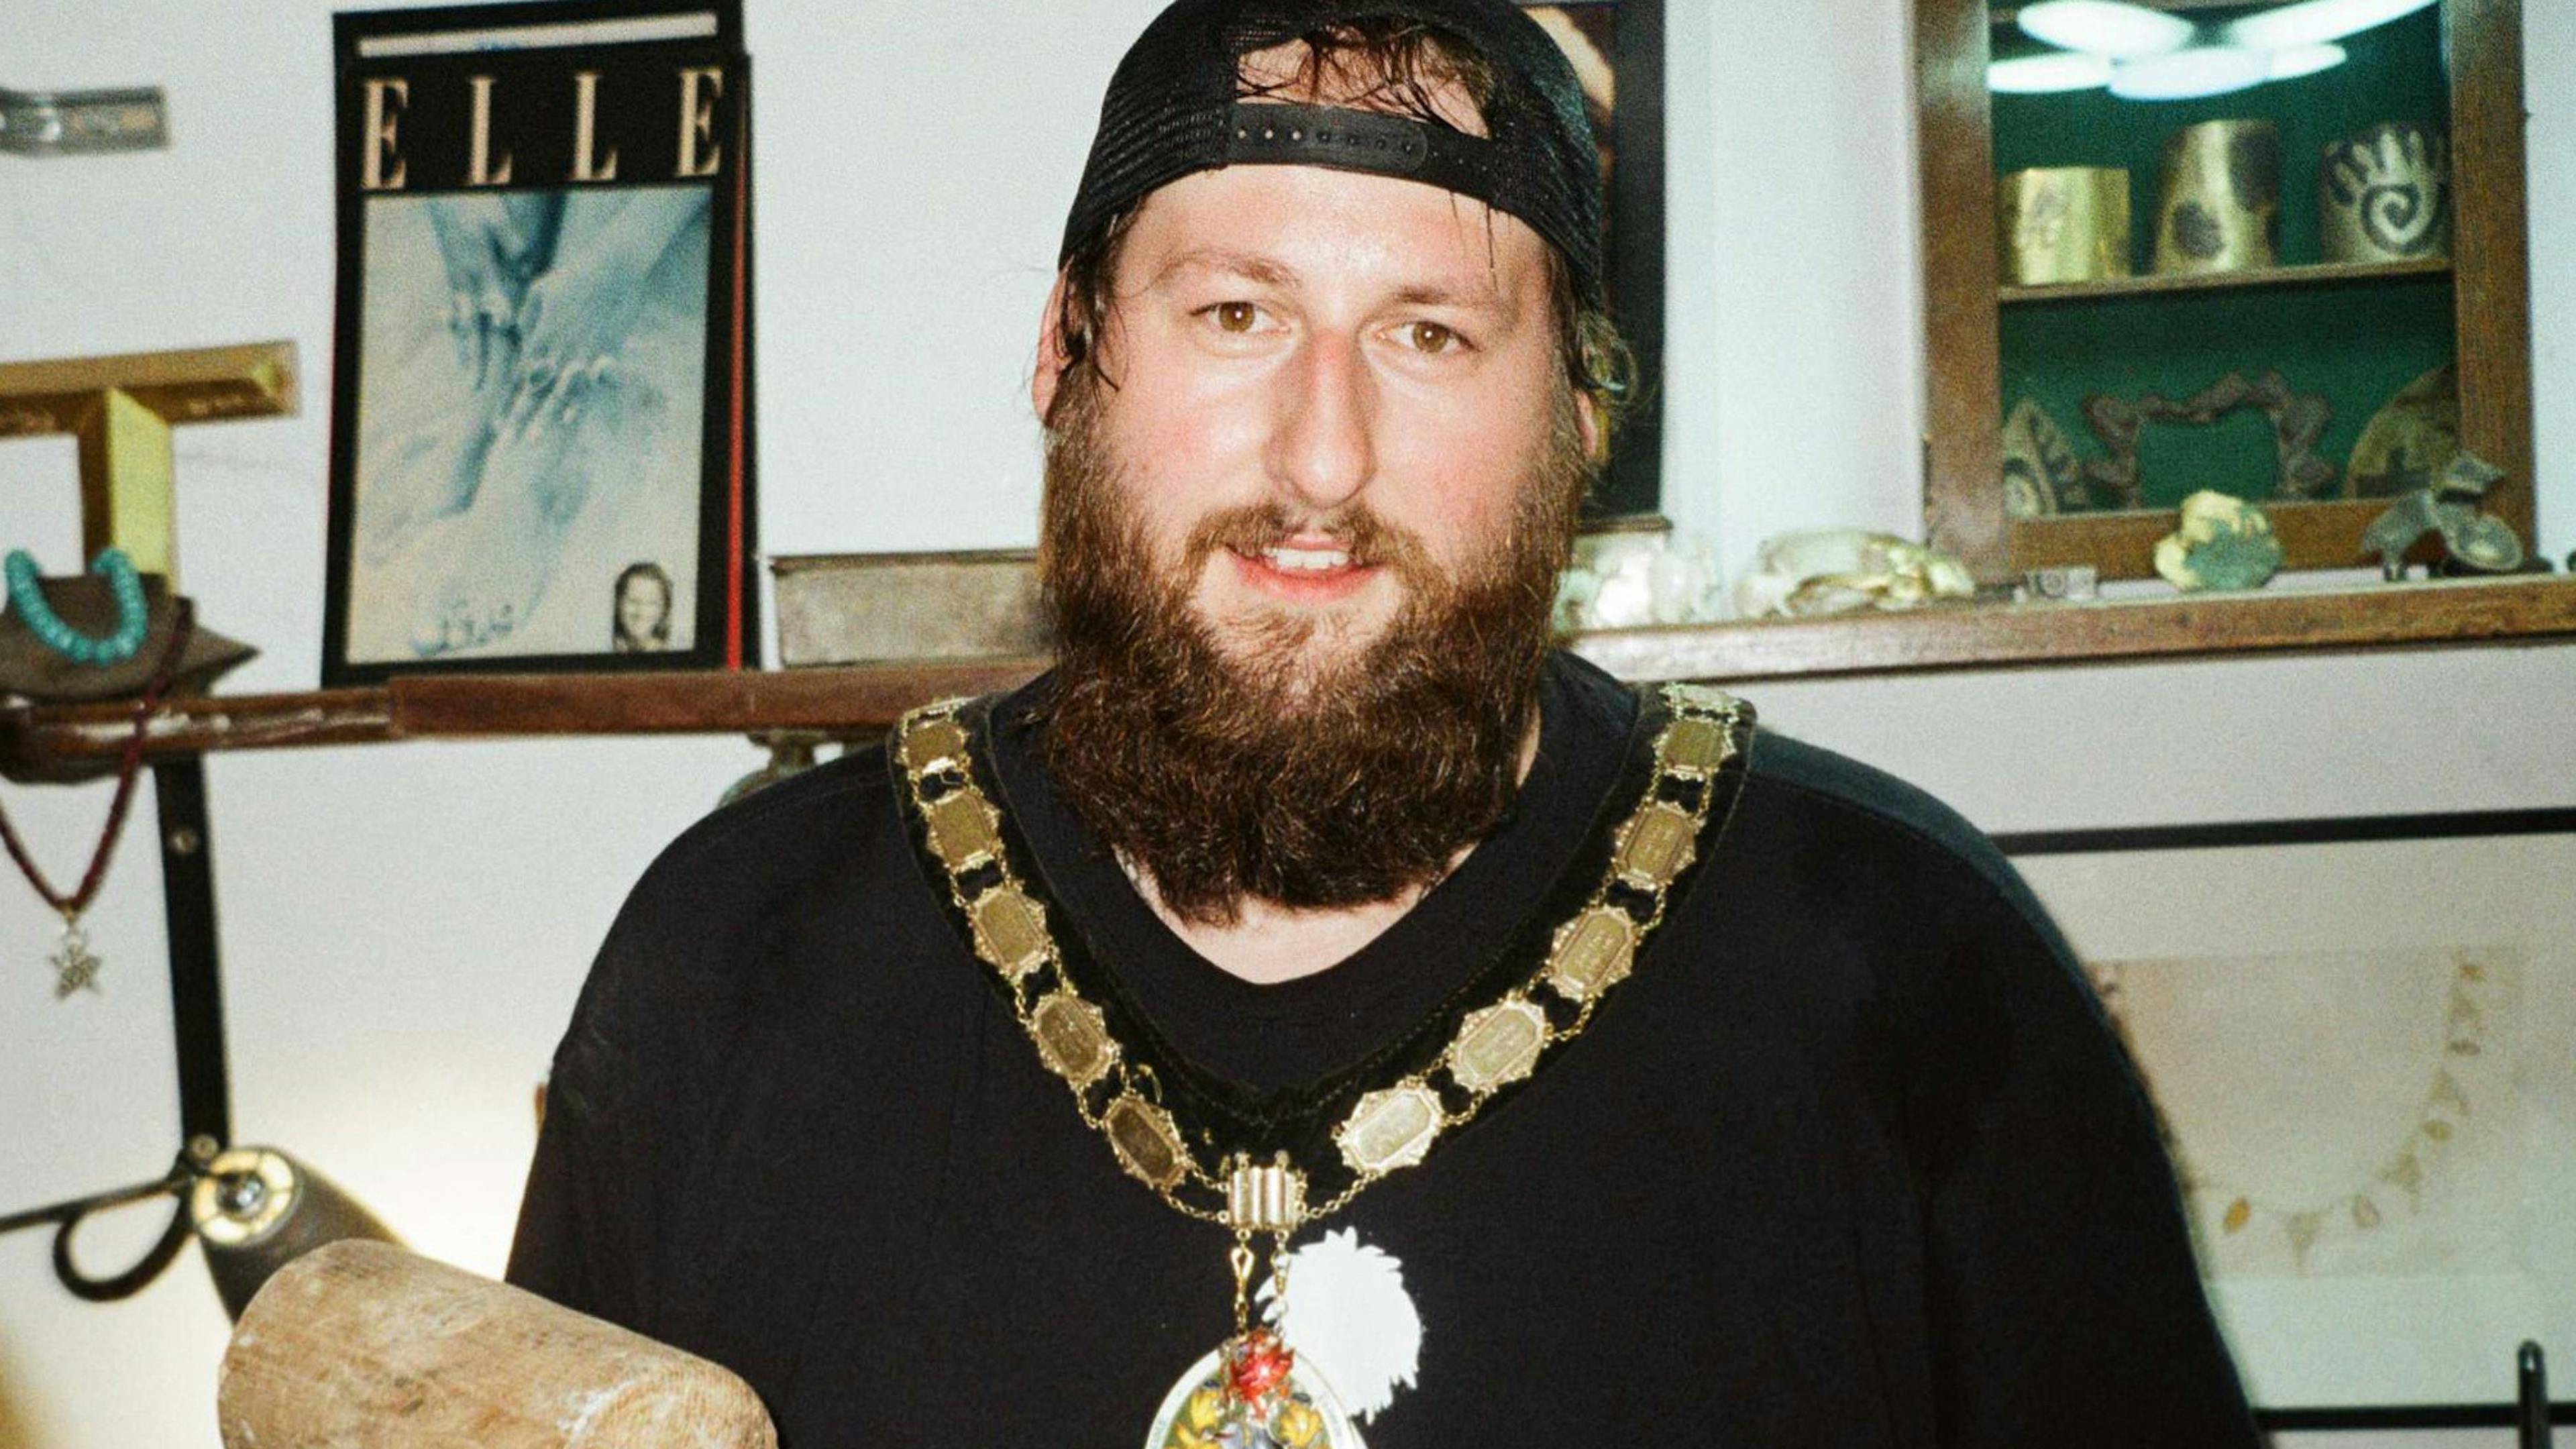 “They kicked party politics out of town”: Spending the day with the punk rock mayor of Frome